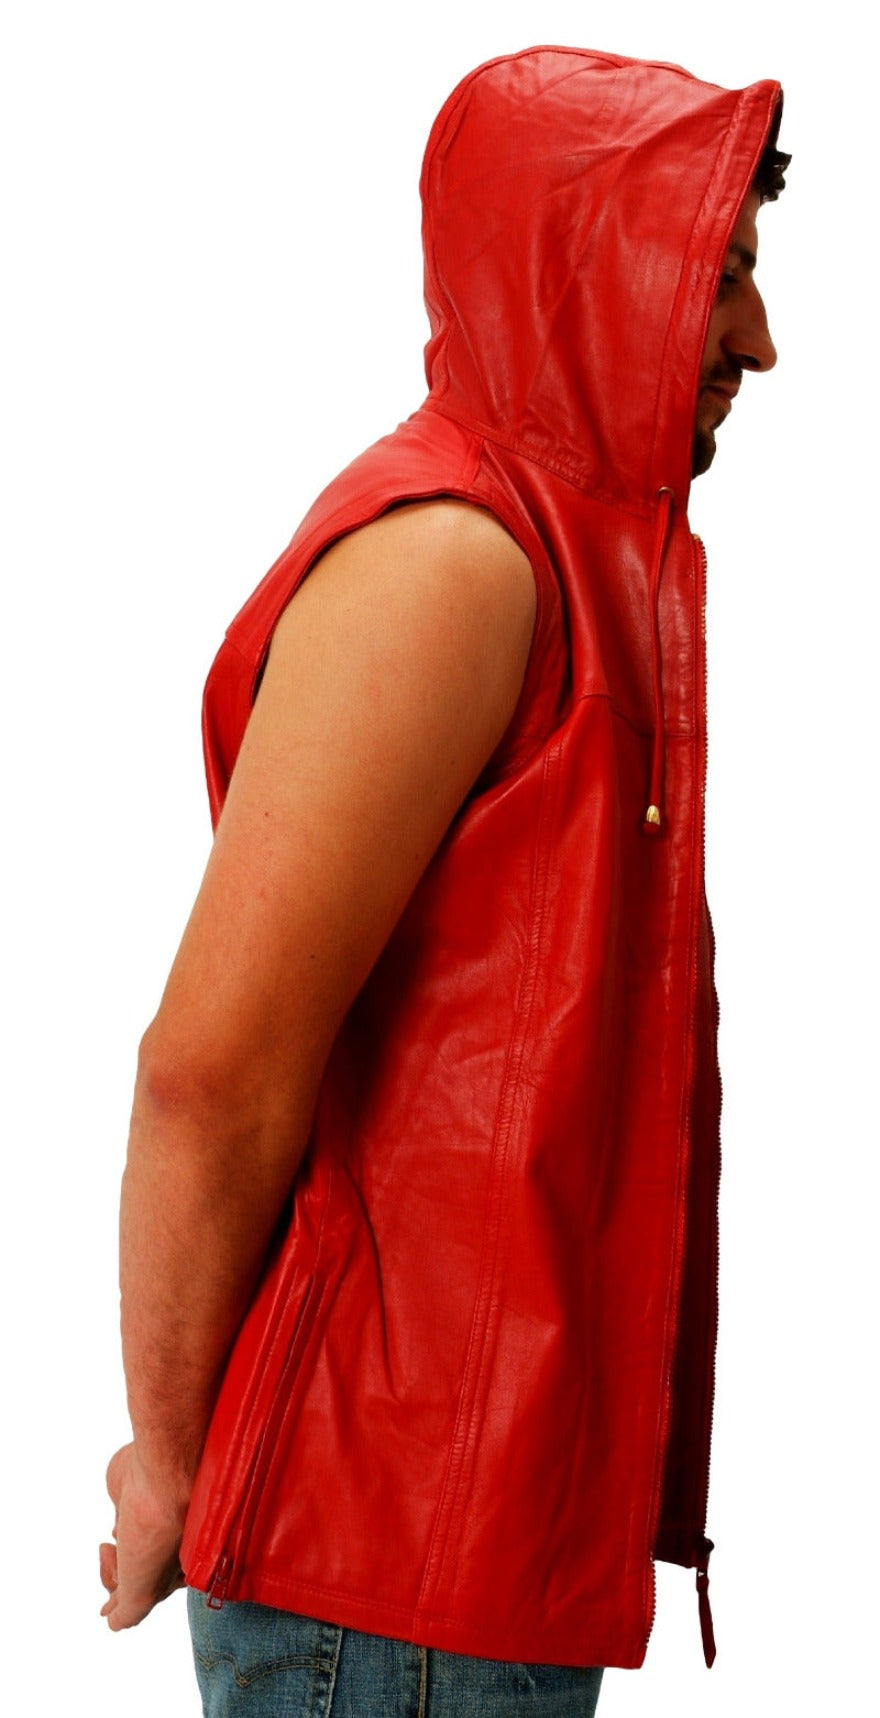 Picture of a model wearing a Sleeveless Leather Shirt in red, Side view with hood up